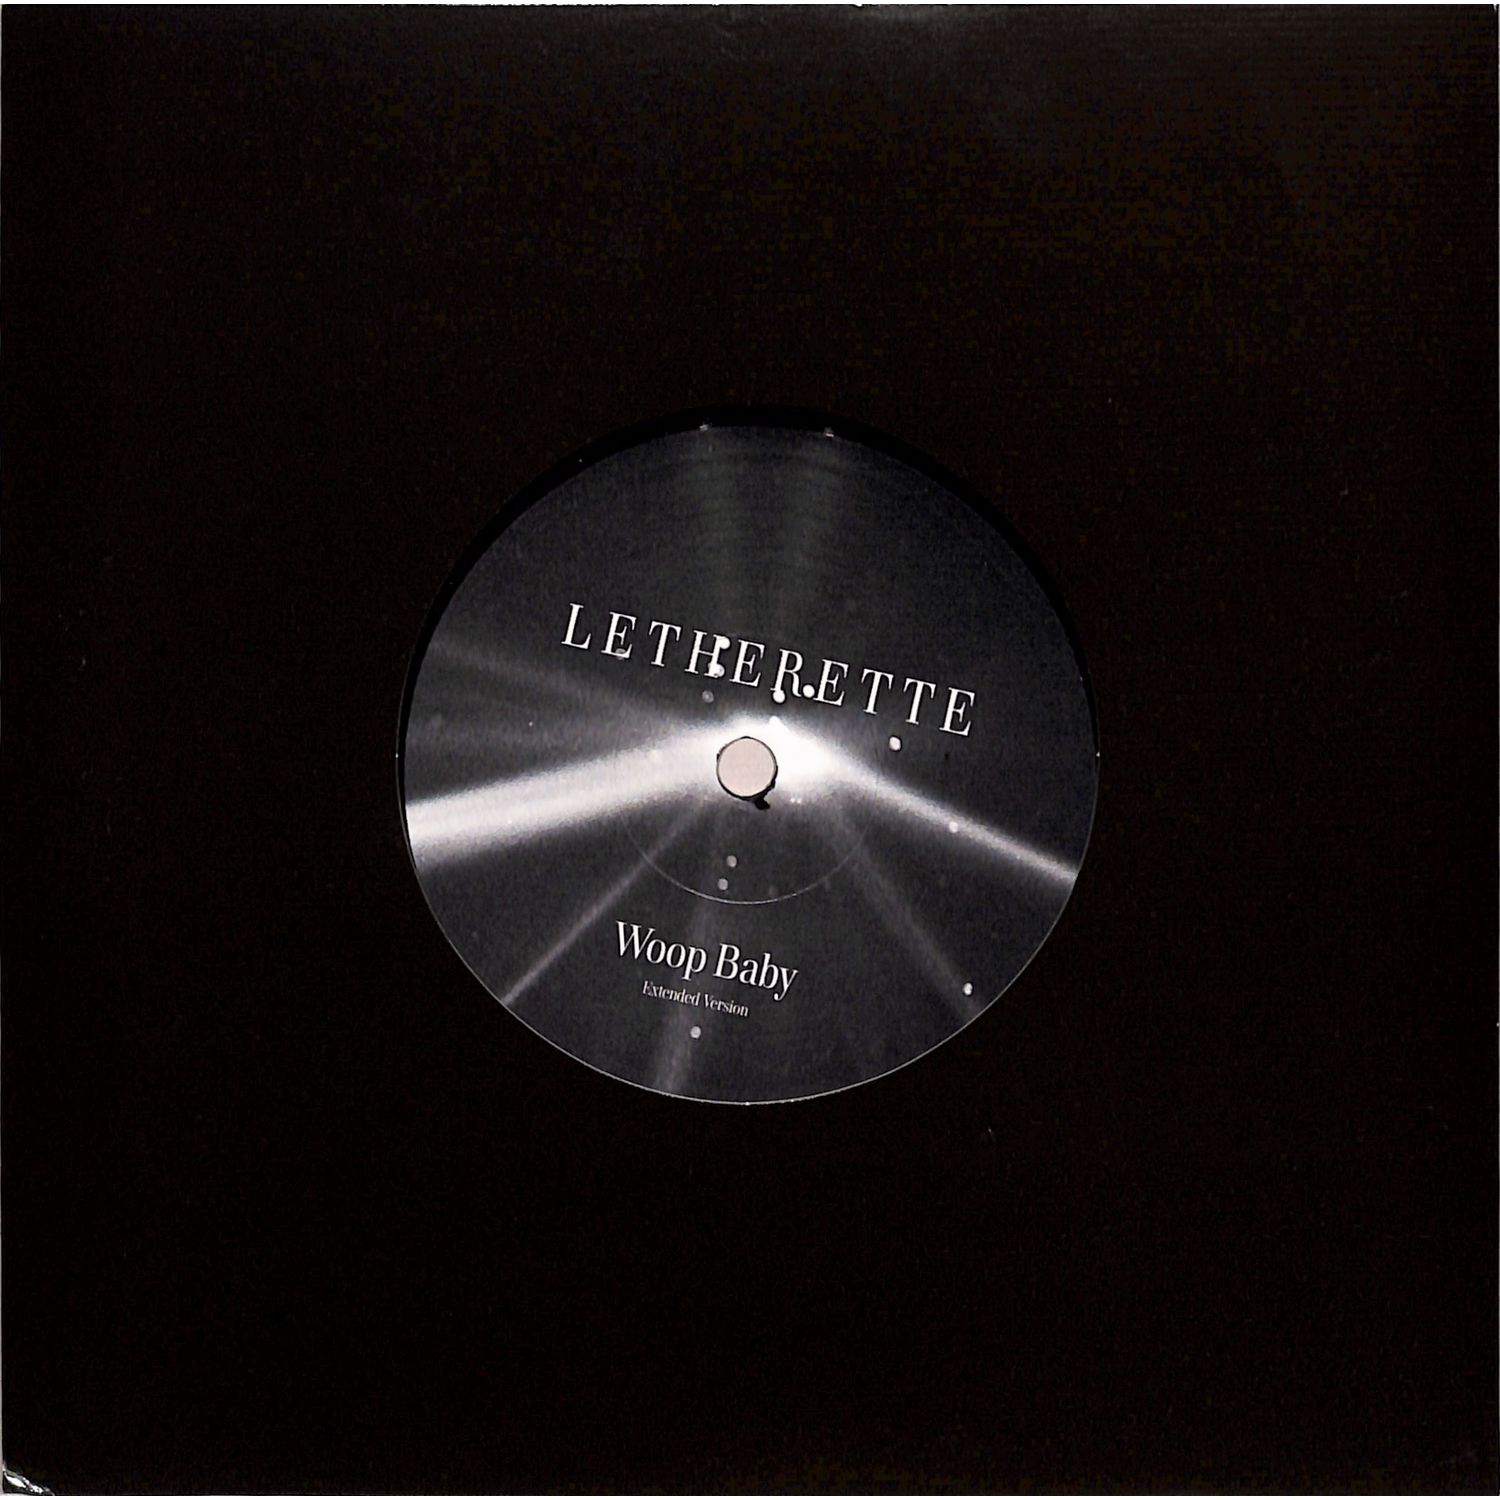 Letherette - WOOP BABY 